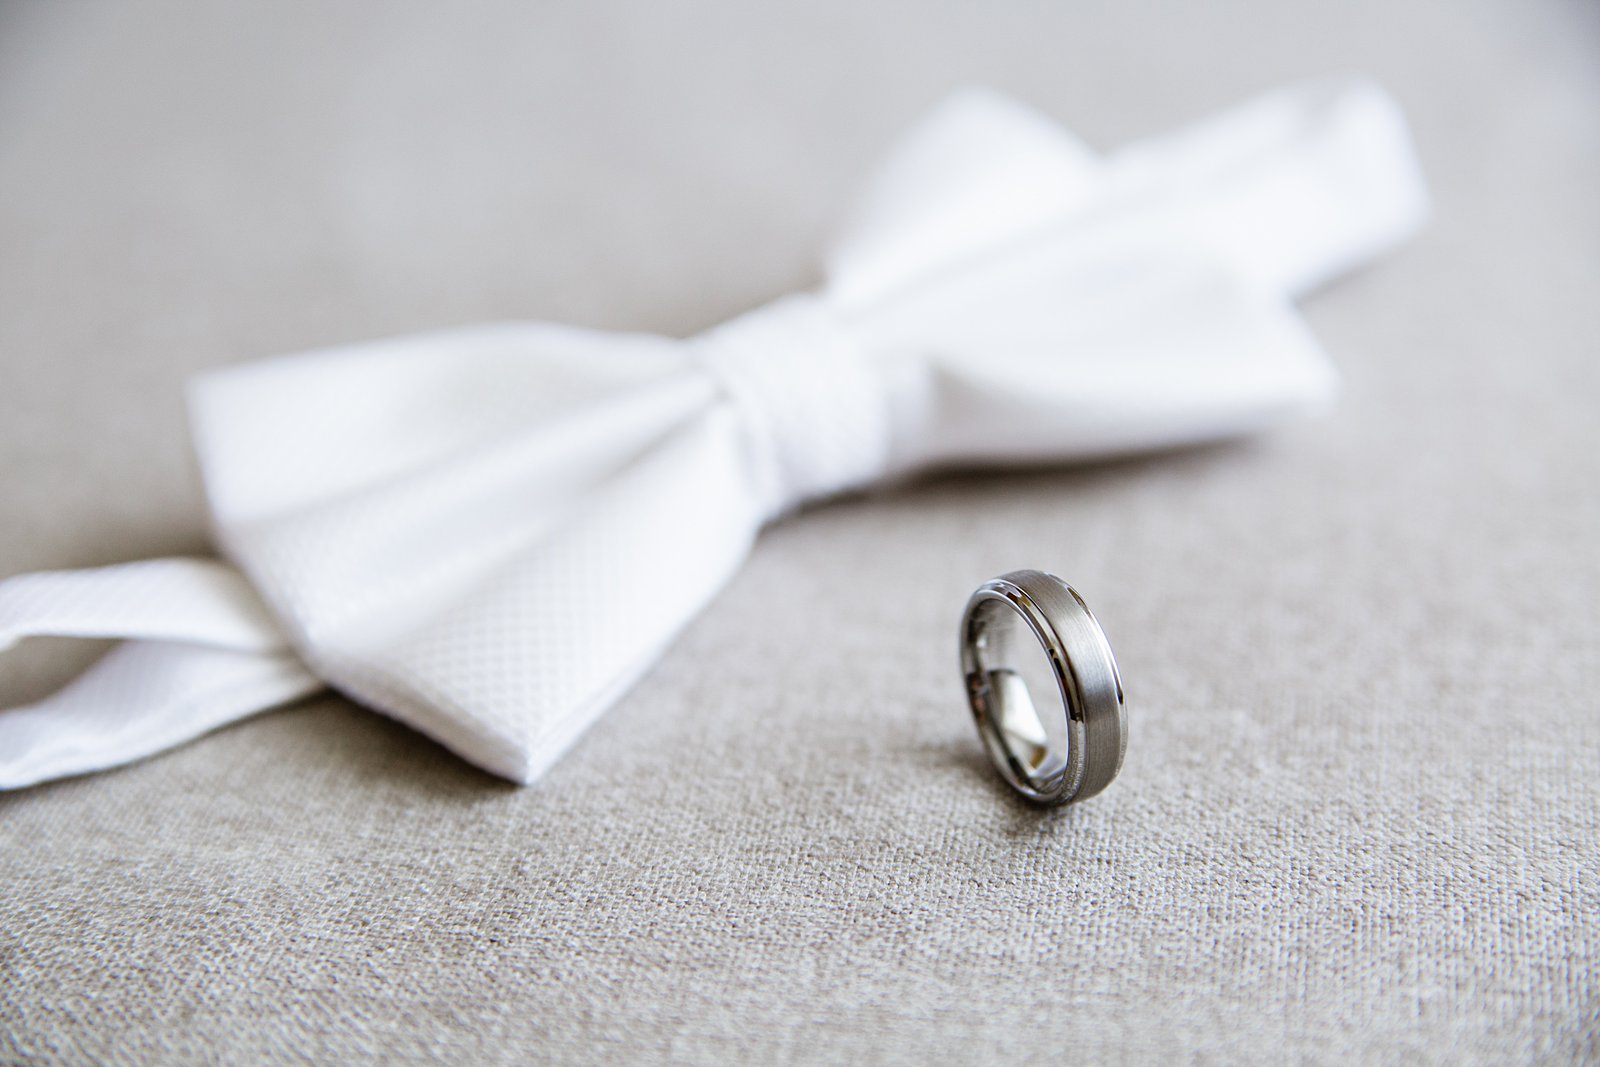 Groom's wedding day details of a wedding band and white bowtie by PMA Photography.